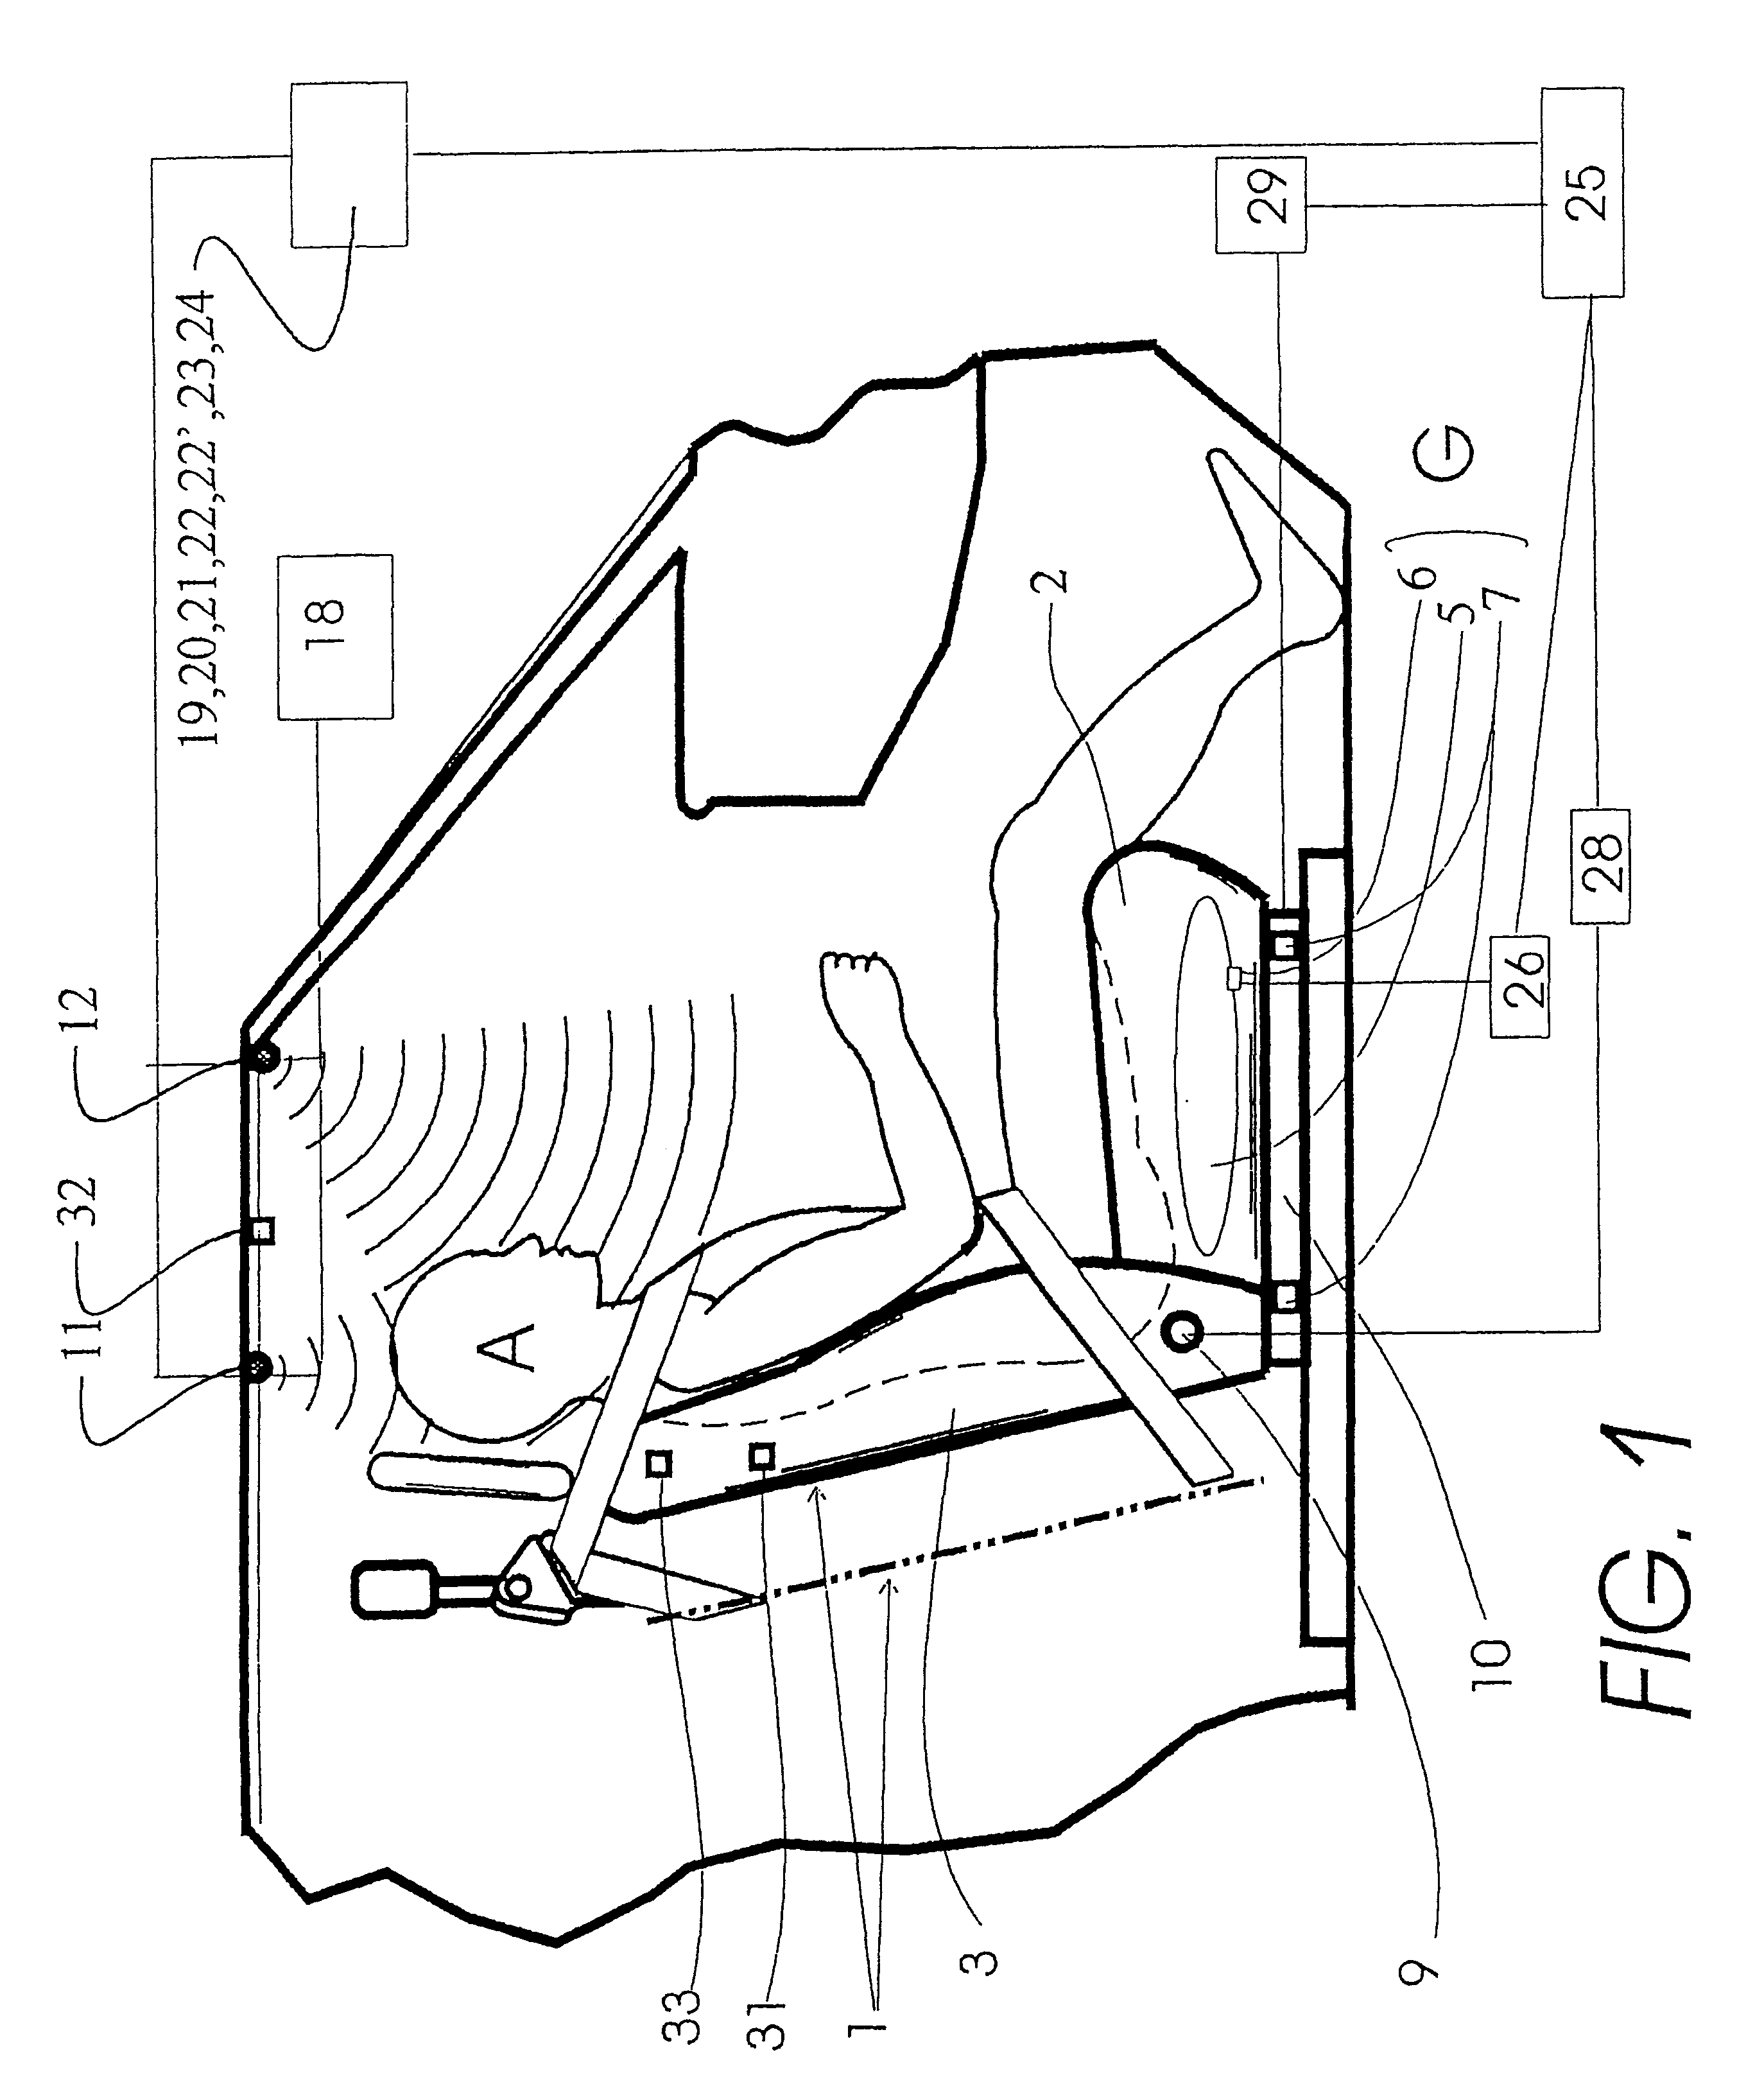 Methods for controlling deployment of an occupant restraint in a vehicle and determining whether the occupant is a child seat